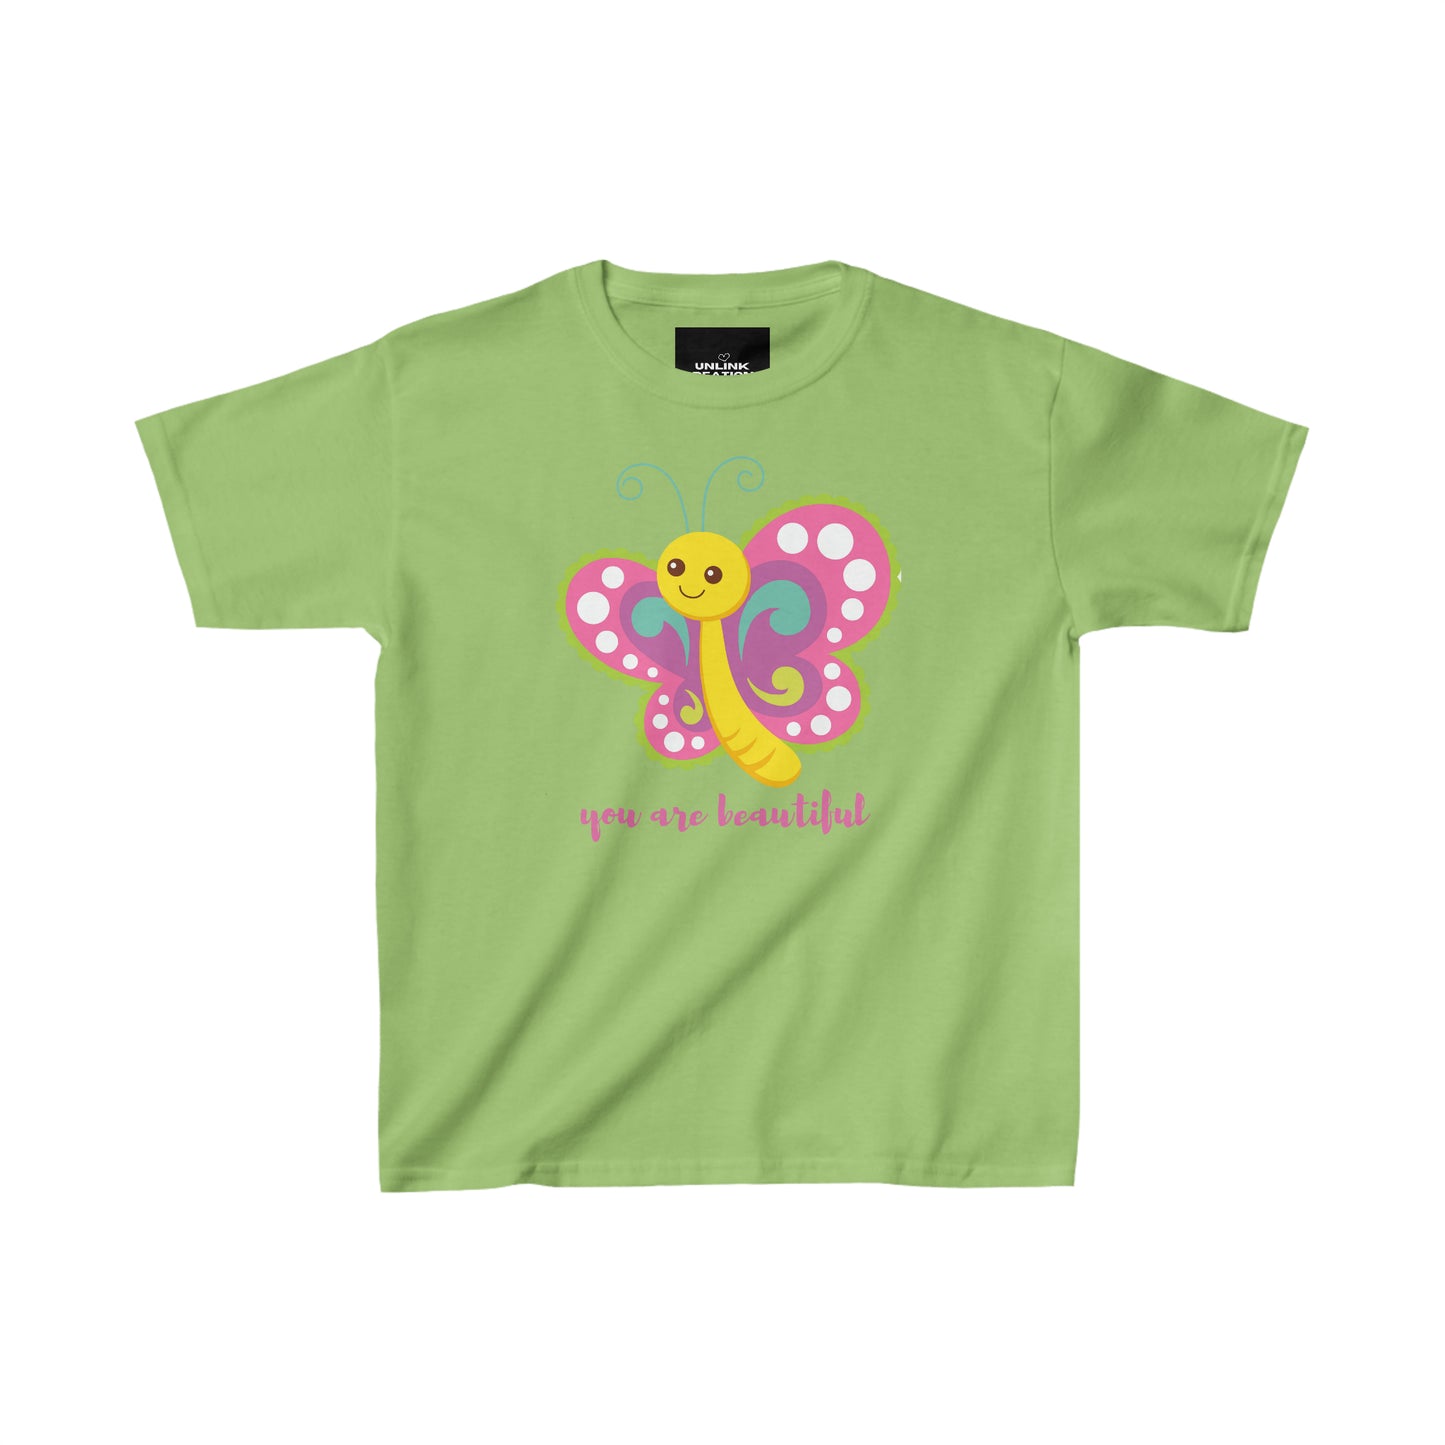 A cute butterfly reminding you that “you are beautiful”  makes this Kids Heavy Cotton™ Tee a fun one to wear!